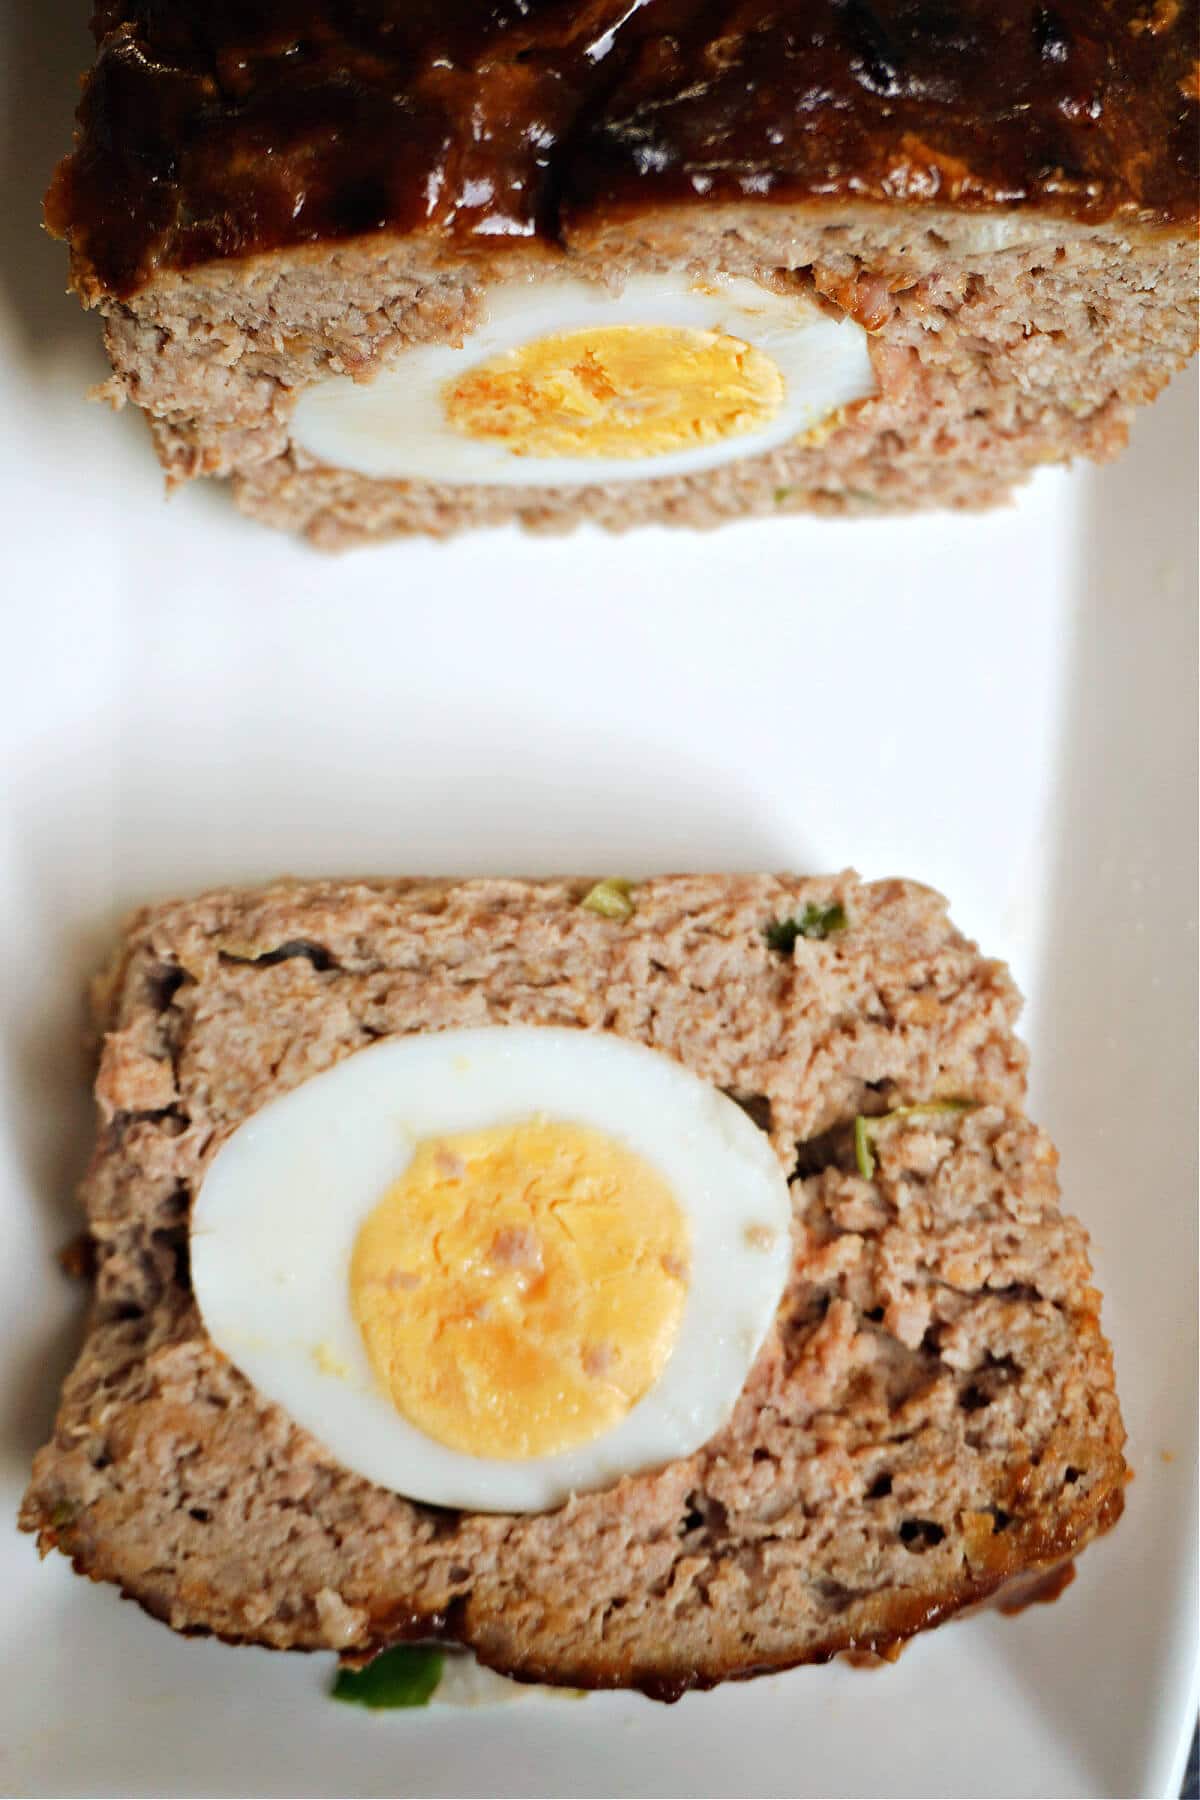 A slice of meatloaf with a slice of boiled egg in the middle.